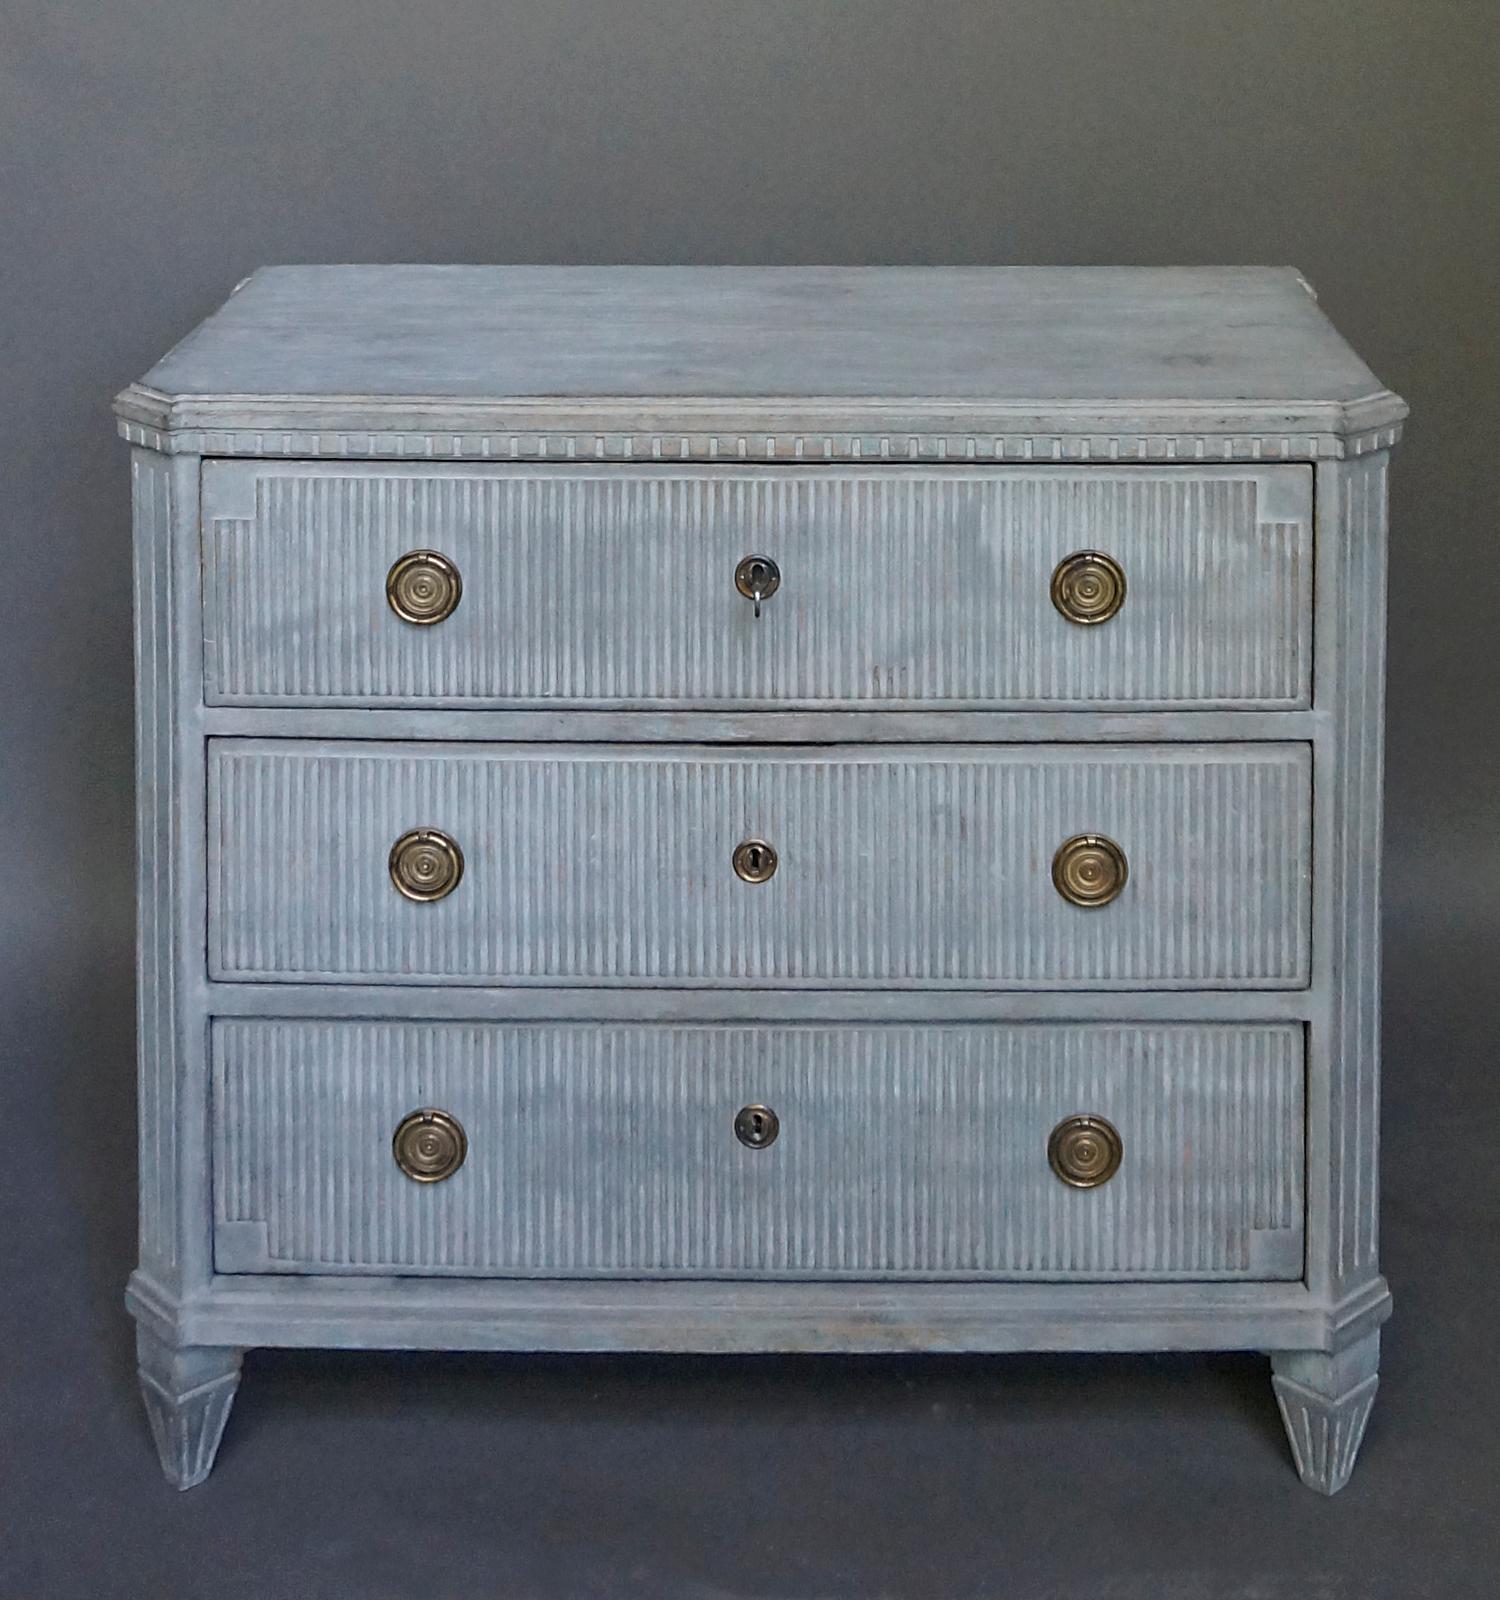 Swedish three-drawer chest in the neoclassical style, circa 1890. The drawer fronts have an overall reeded pattern with notched corners. Shaped top with dentil molding, canted corners, and tapering square feet. Brass pulls and escutcheons. Later